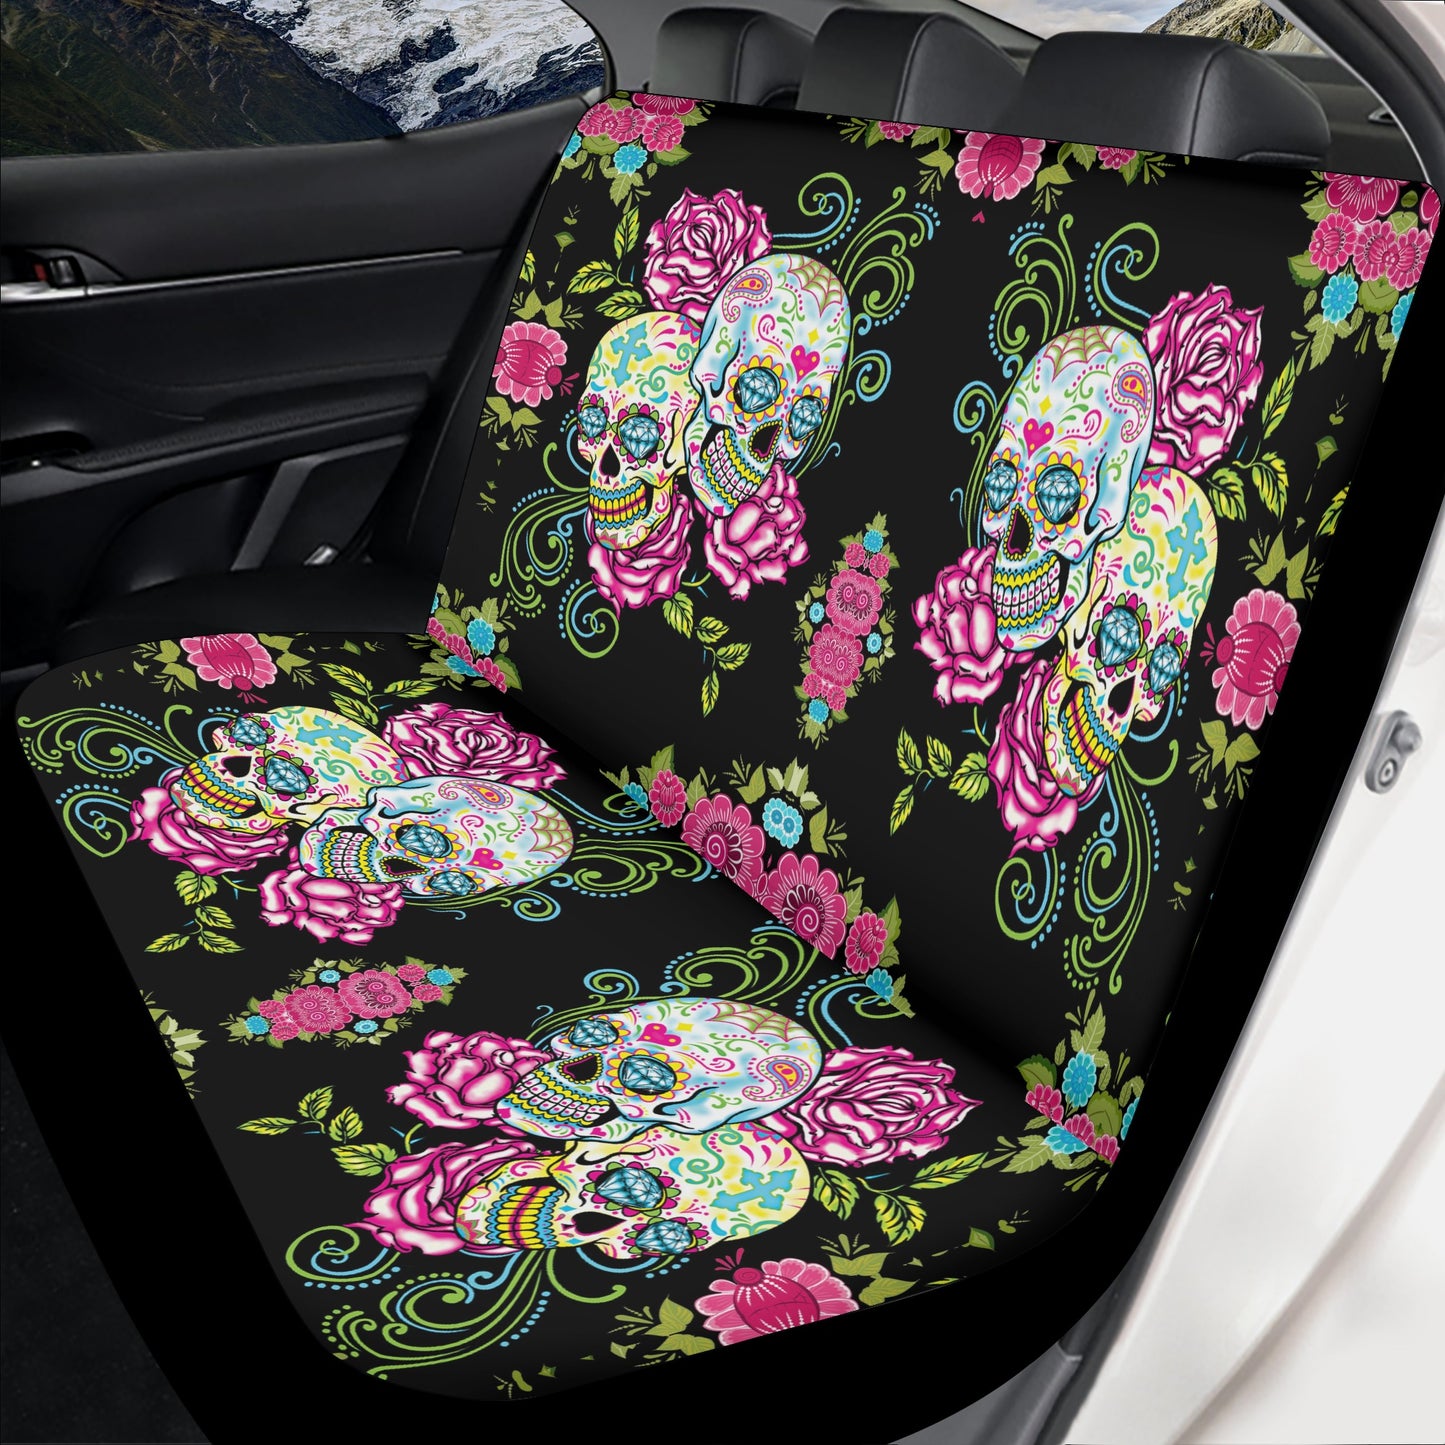 Calaveras skull slip-on seat covers, sugar skull seat cover for vehicles, day of the dead seat cover for vehicles, calaveras skull car prote